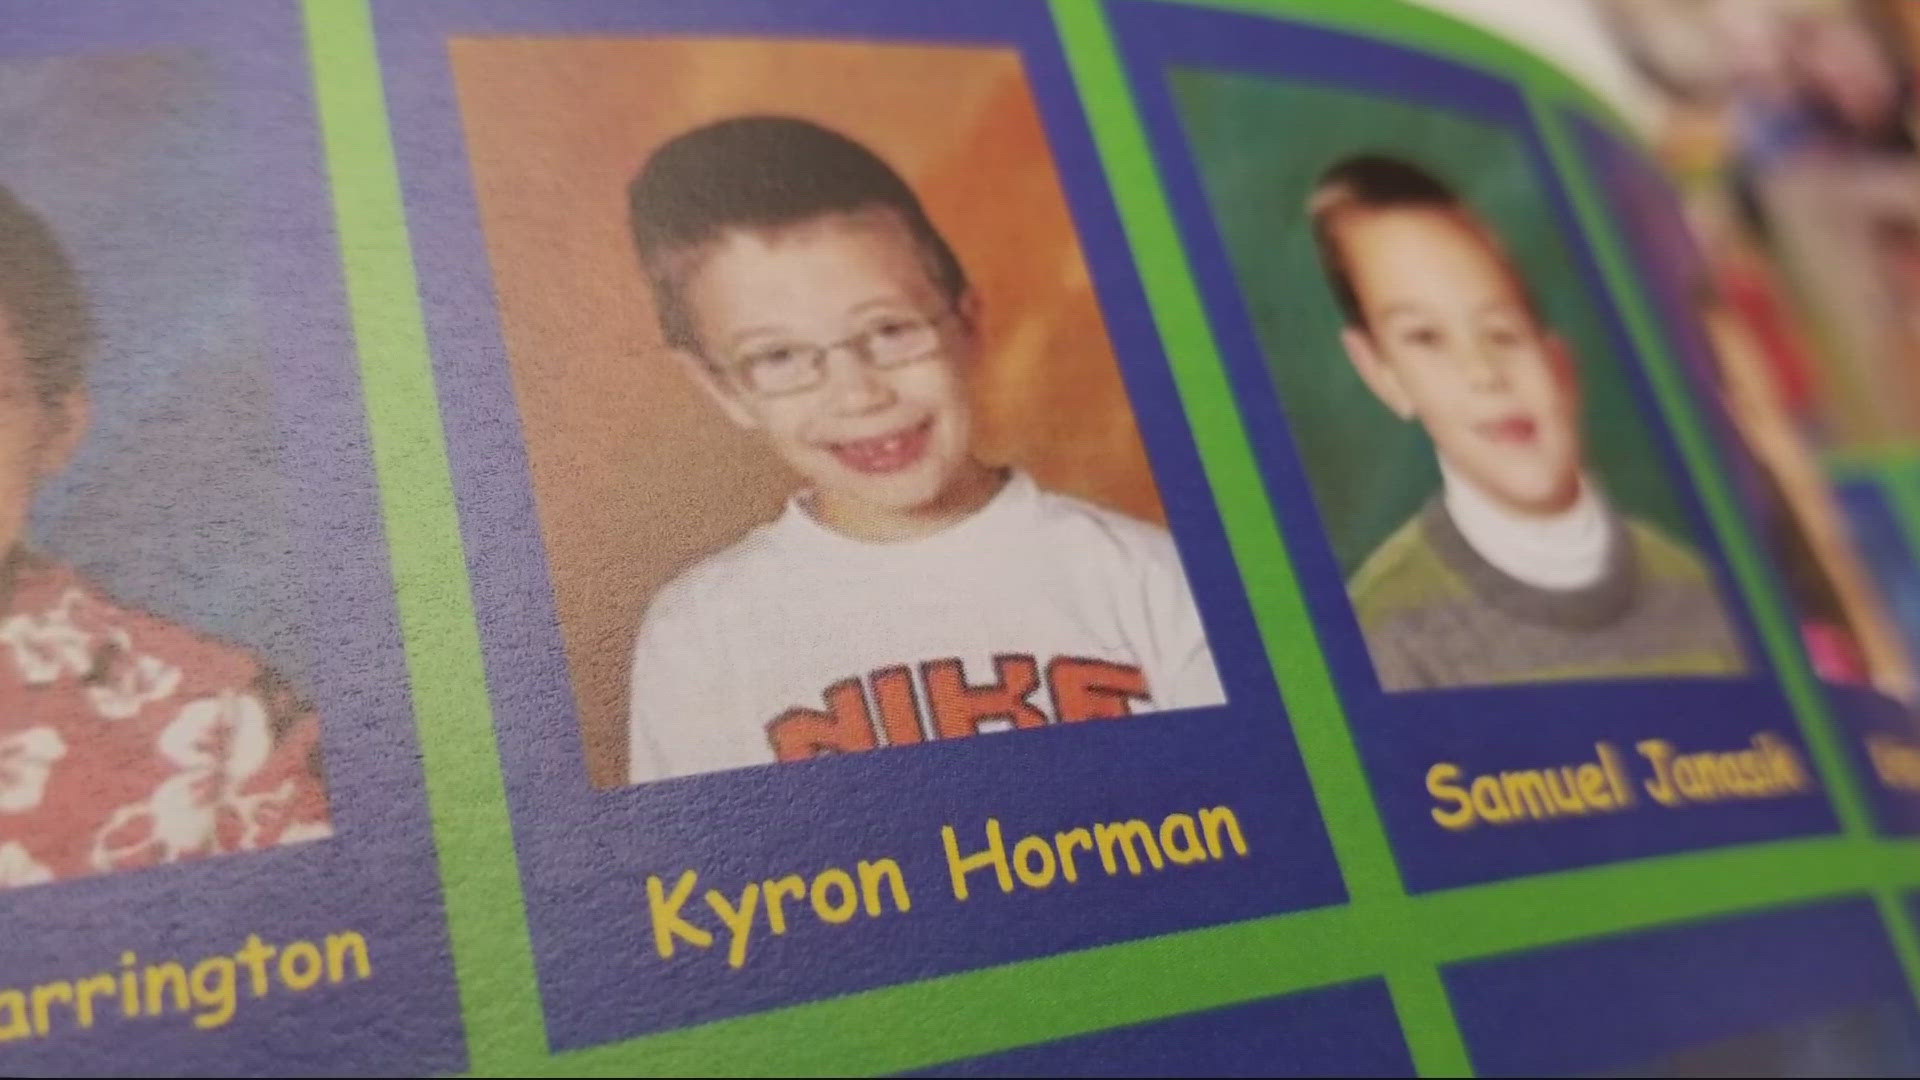 The webpage gives the public a place to learn more about open and unsolved cases and submit tips. Kyron Horman is the only case currently listed.